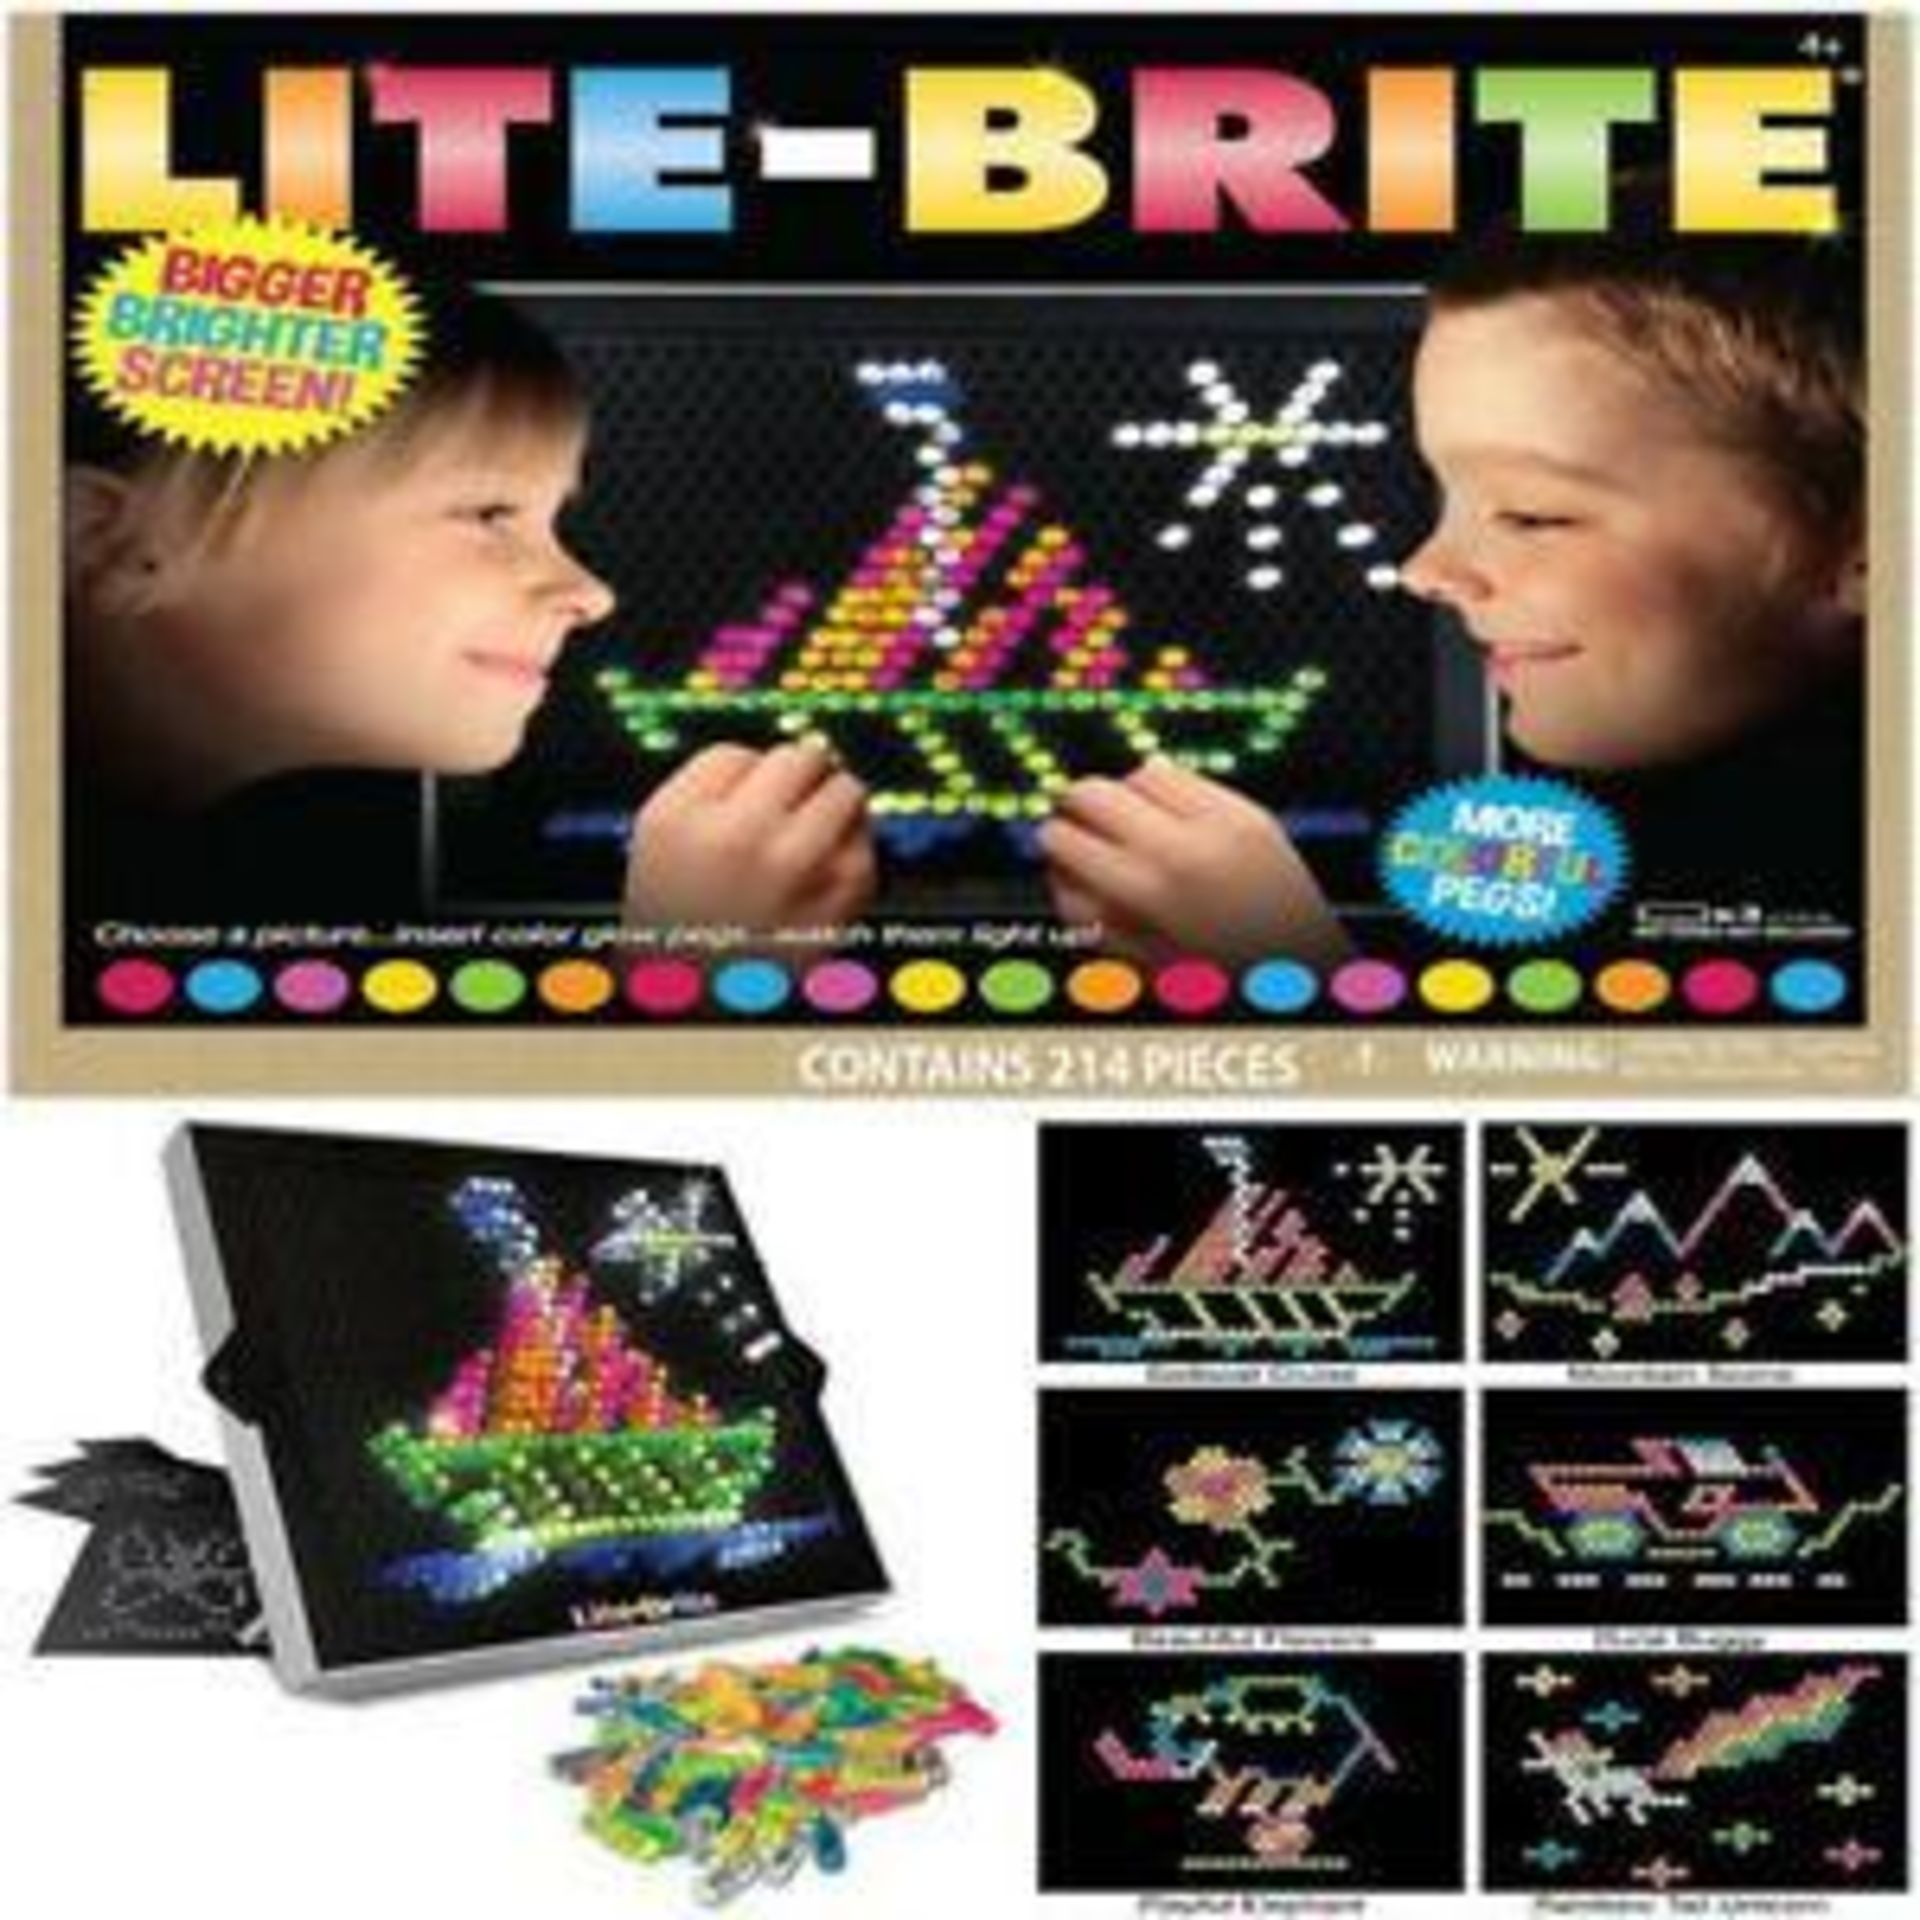 Bigger Lighter Screen Lite-Brite More Colorful Pegs Contains 214 Pieces